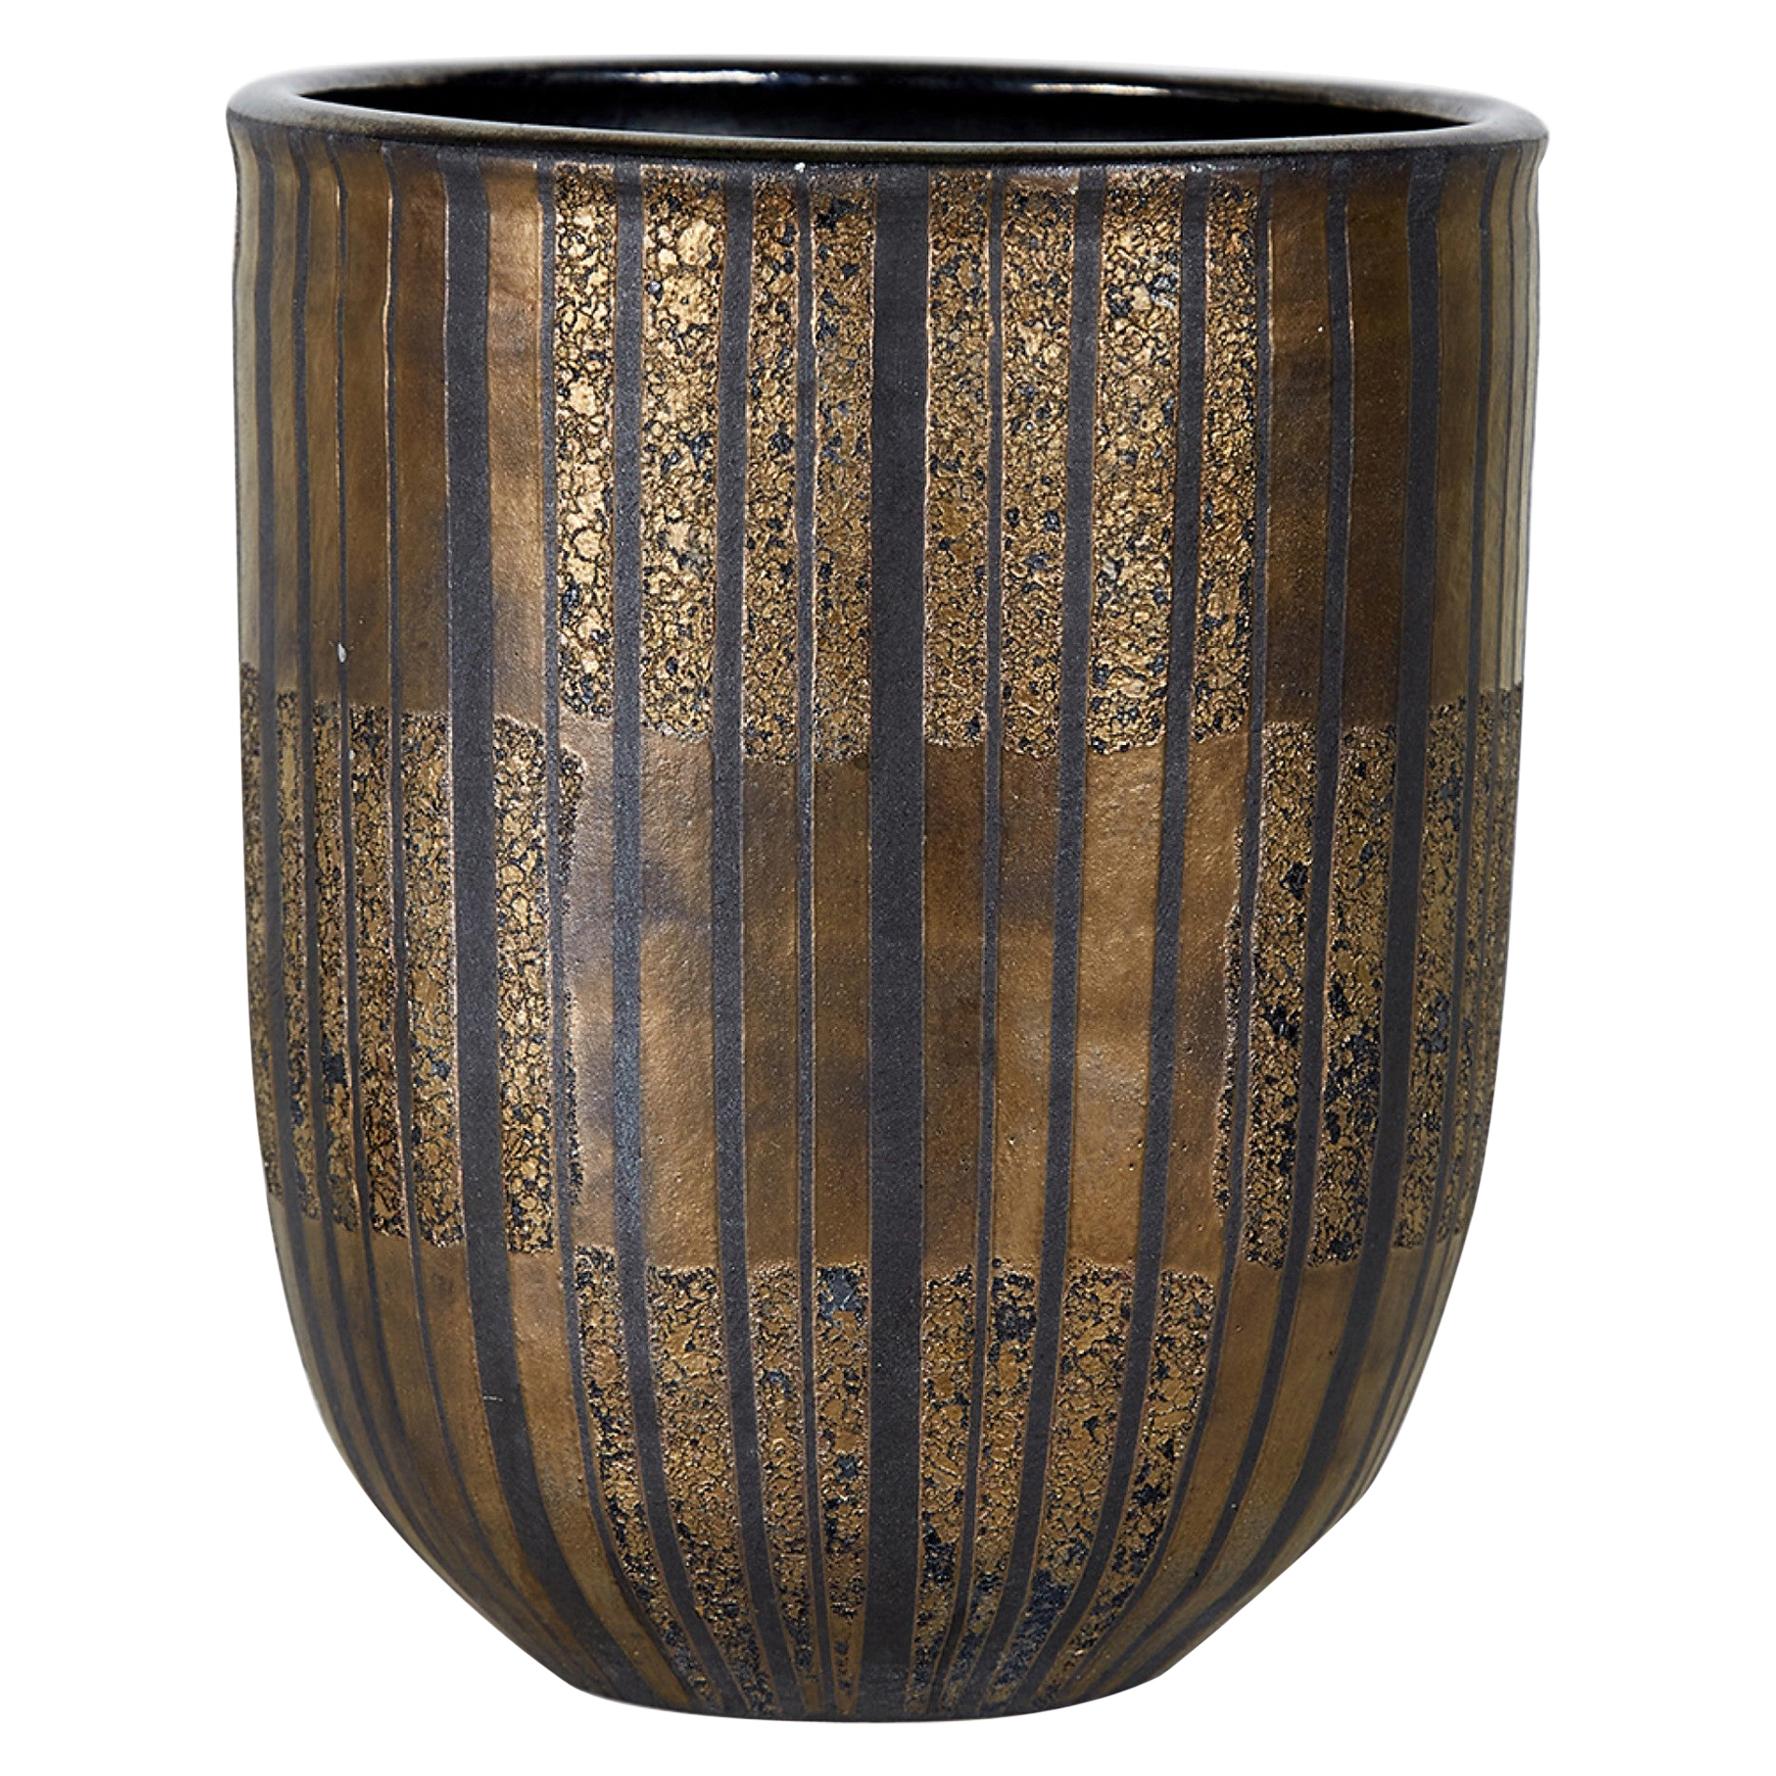 Gary Di Pasquale Contemporary Thrown Bronze and Black Glazed Cylindrical Vase For Sale